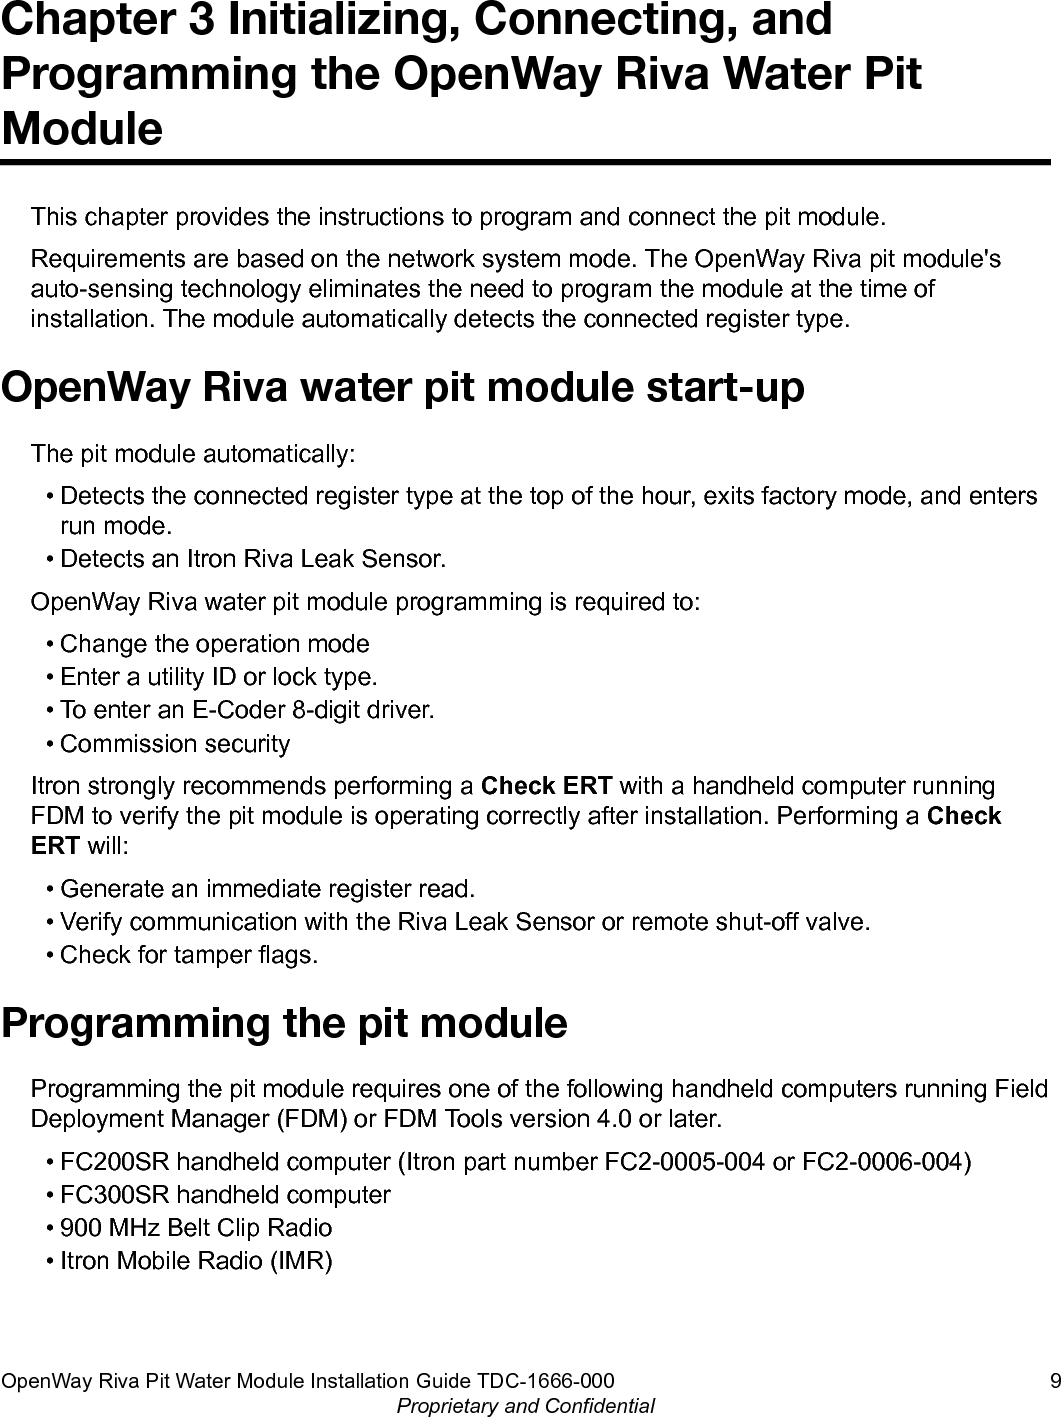 Chapter 3 Initializing, Connecting, andProgramming the OpenWay Riva Water PitModuleThis chapter provides the instructions to program and connect the pit module.Requirements are based on the network system mode. The OpenWay Riva pit module&apos;sauto-sensing technology eliminates the need to program the module at the time ofinstallation. The module automatically detects the connected register type.OpenWay Riva water pit module start-upThe pit module automatically:• Detects the connected register type at the top of the hour, exits factory mode, and entersrun mode.• Detects an Itron Riva Leak Sensor.OpenWay Riva water pit module programming is required to:• Change the operation mode• Enter a utility ID or lock type.• To enter an E-Coder 8-digit driver.• Commission securityItron strongly recommends performing a Check ERT with a handheld computer runningFDM to verify the pit module is operating correctly after installation. Performing a CheckERT will:• Generate an immediate register read.• Verify communication with the Riva Leak Sensor or remote shut-off valve.• Check for tamper flags.Programming the pit moduleProgramming the pit module requires one of the following handheld computers running FieldDeployment Manager (FDM) or FDM Tools version 4.0 or later.• FC200SR handheld computer (Itron part number FC2-0005-004 or FC2-0006-004)• FC300SR handheld computer• 900 MHz Belt Clip Radio• Itron Mobile Radio (IMR)OpenWay Riva Pit Water Module Installation Guide TDC-1666-000 9Proprietary and Confidential